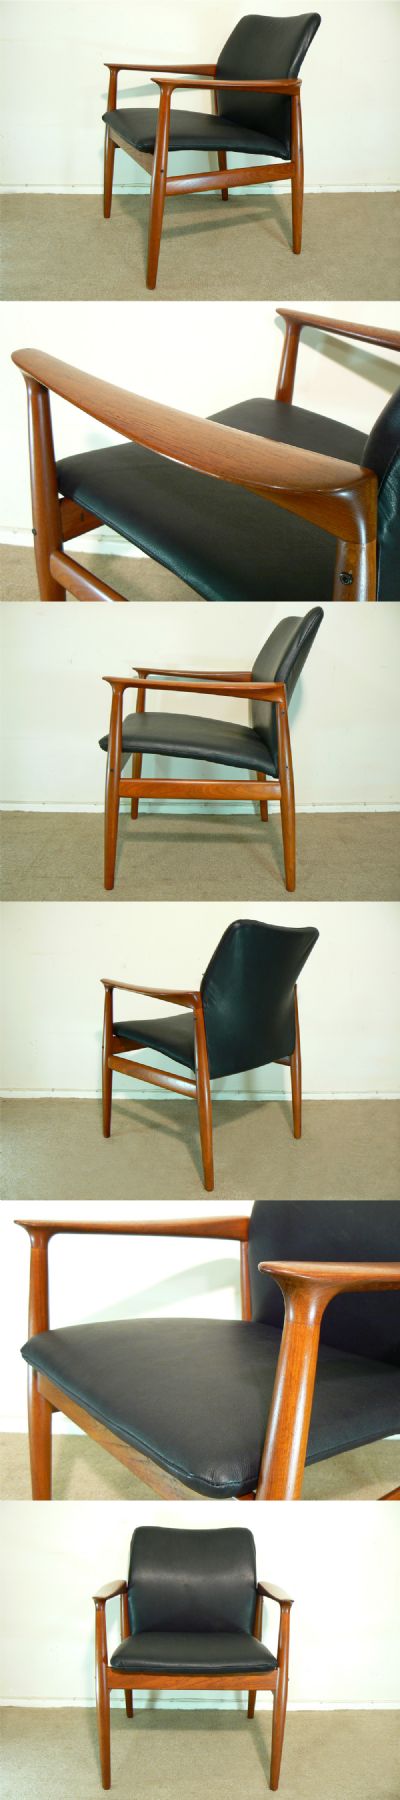 A teak armchair, c1960s. Manufactured by Glostrup Mobelfabrik and designed by Grete Jalke.  Newly covered in black hide.